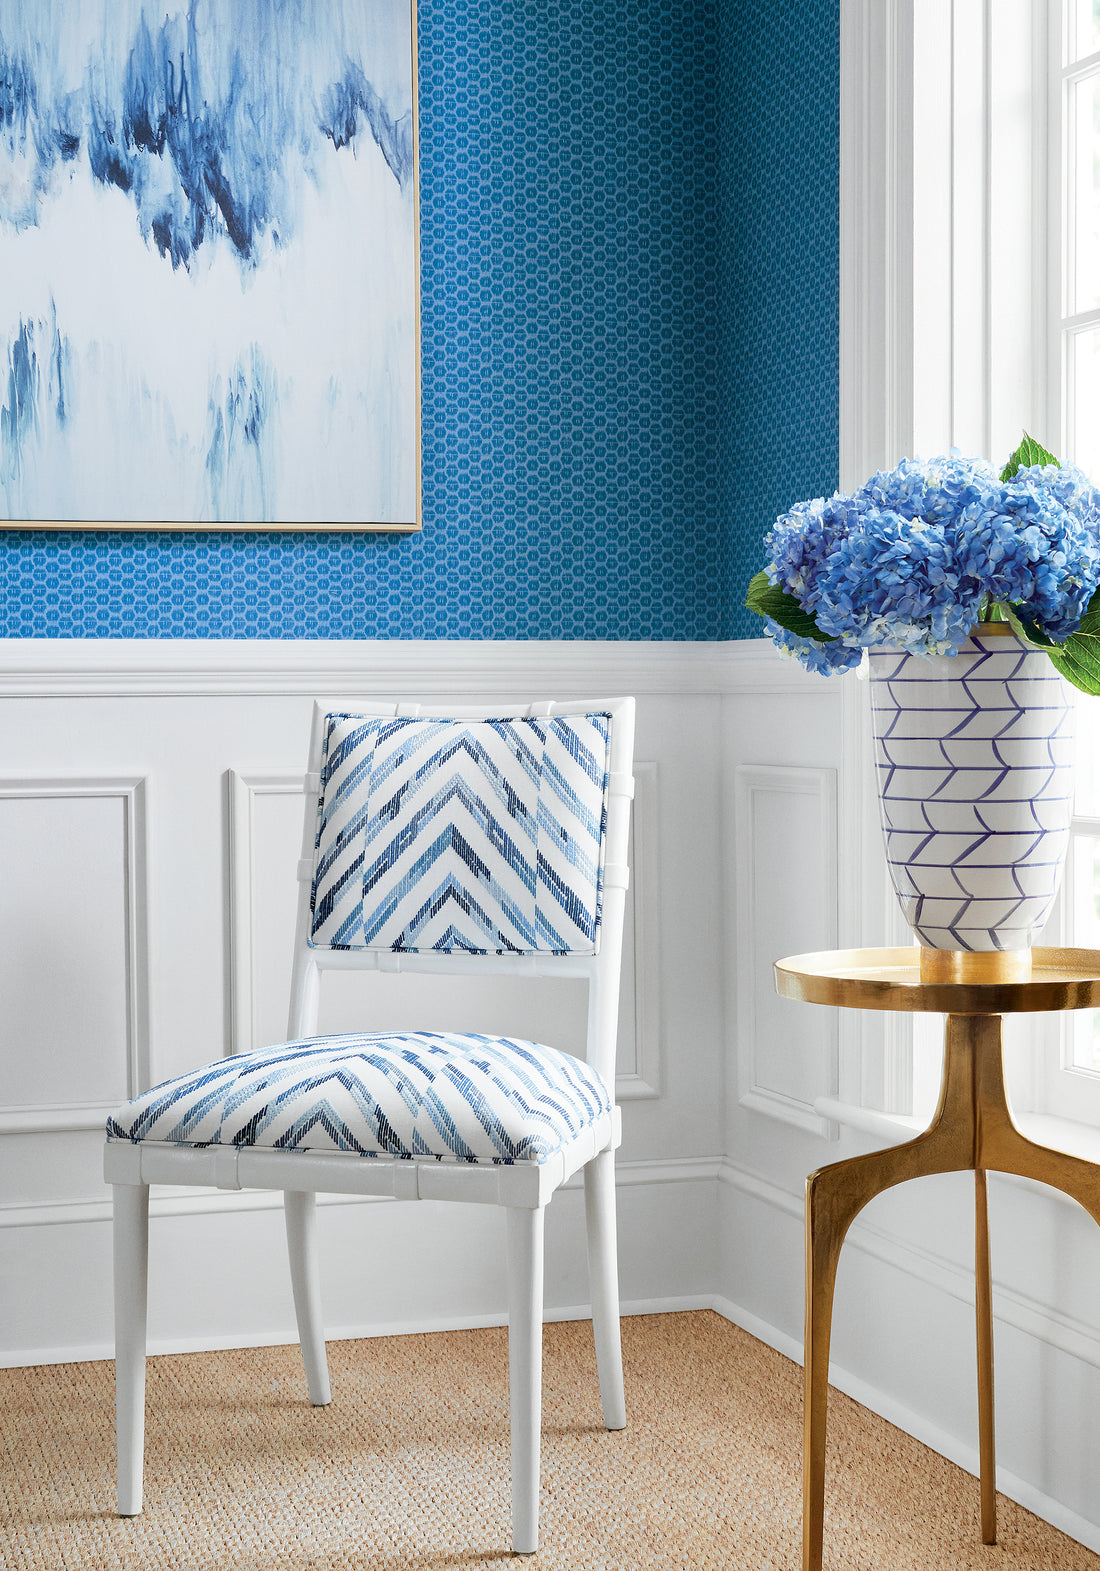 Greenwich Dining Chair upholstered in Thibaut Hamilton Embroidery woven fabric in Blue and White color